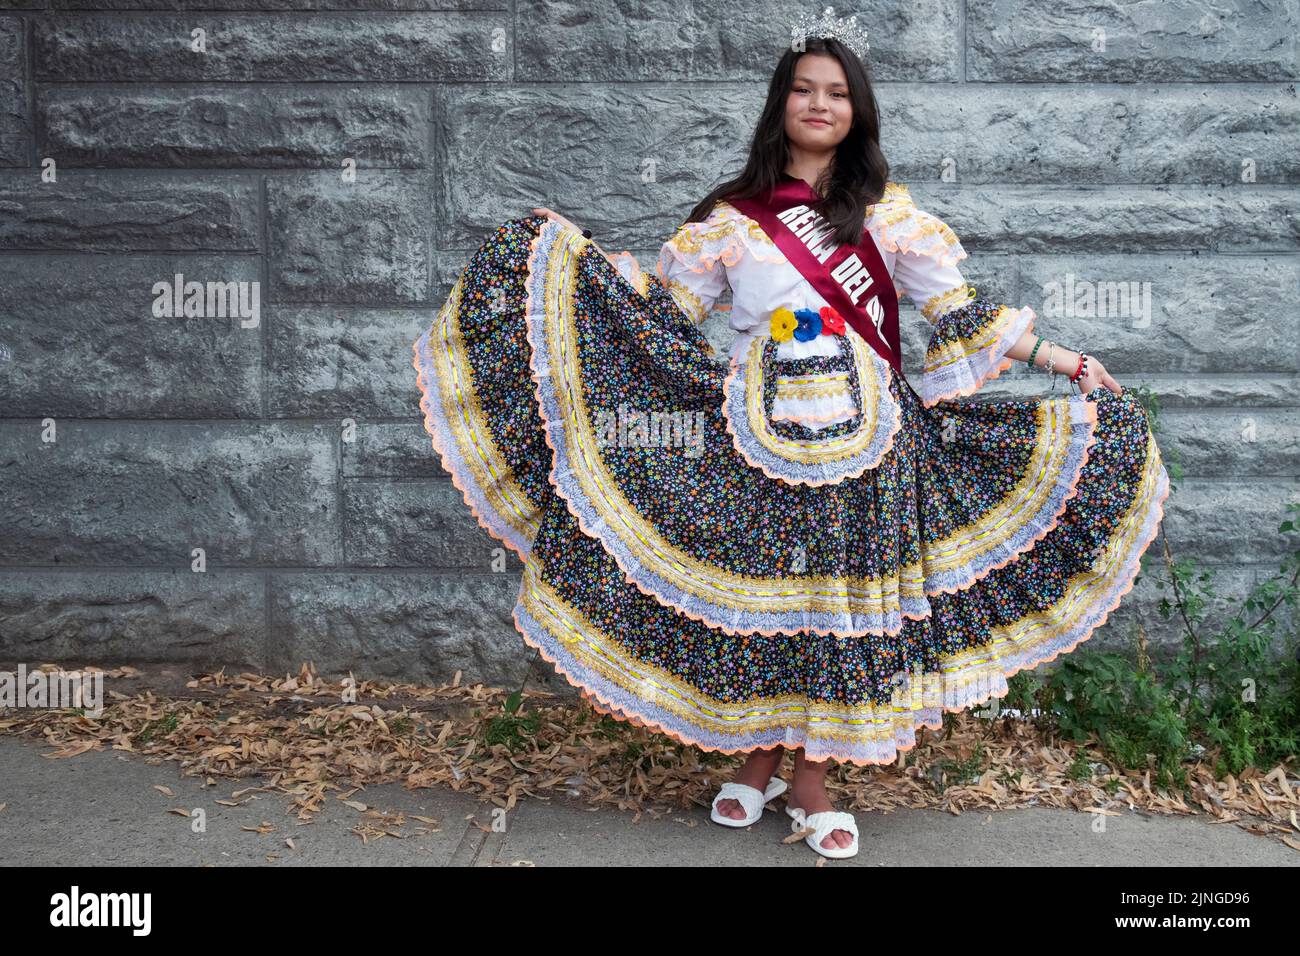 A pretty teen beauty queen just prior to the Ecuadorian Parade NYC 2022 in Jackson Heights, Queens, New York. Stock Photo